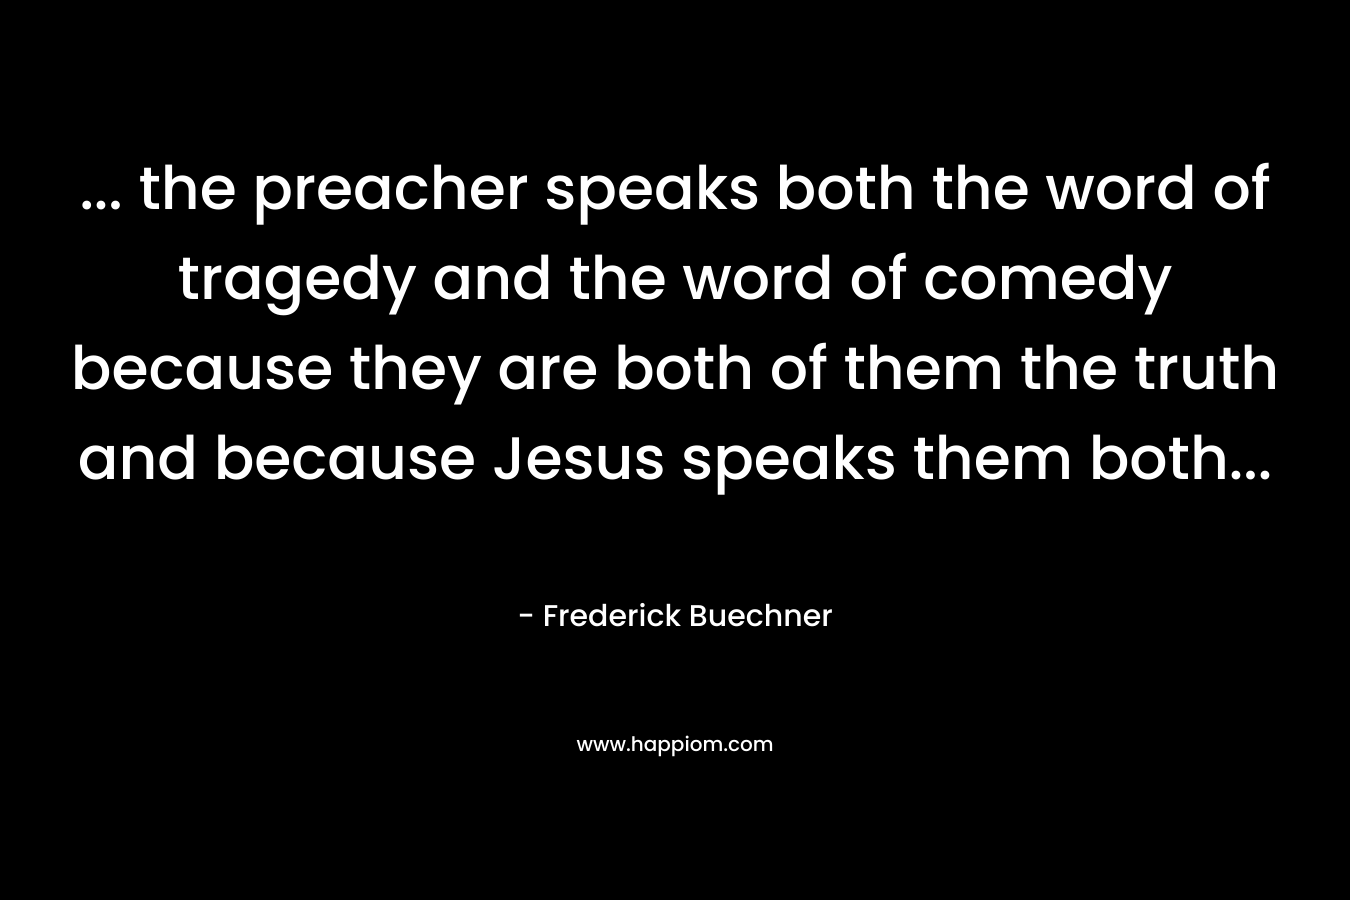 … the preacher speaks both the word of tragedy and the word of comedy because they are both of them the truth and because Jesus speaks them both… – Frederick Buechner